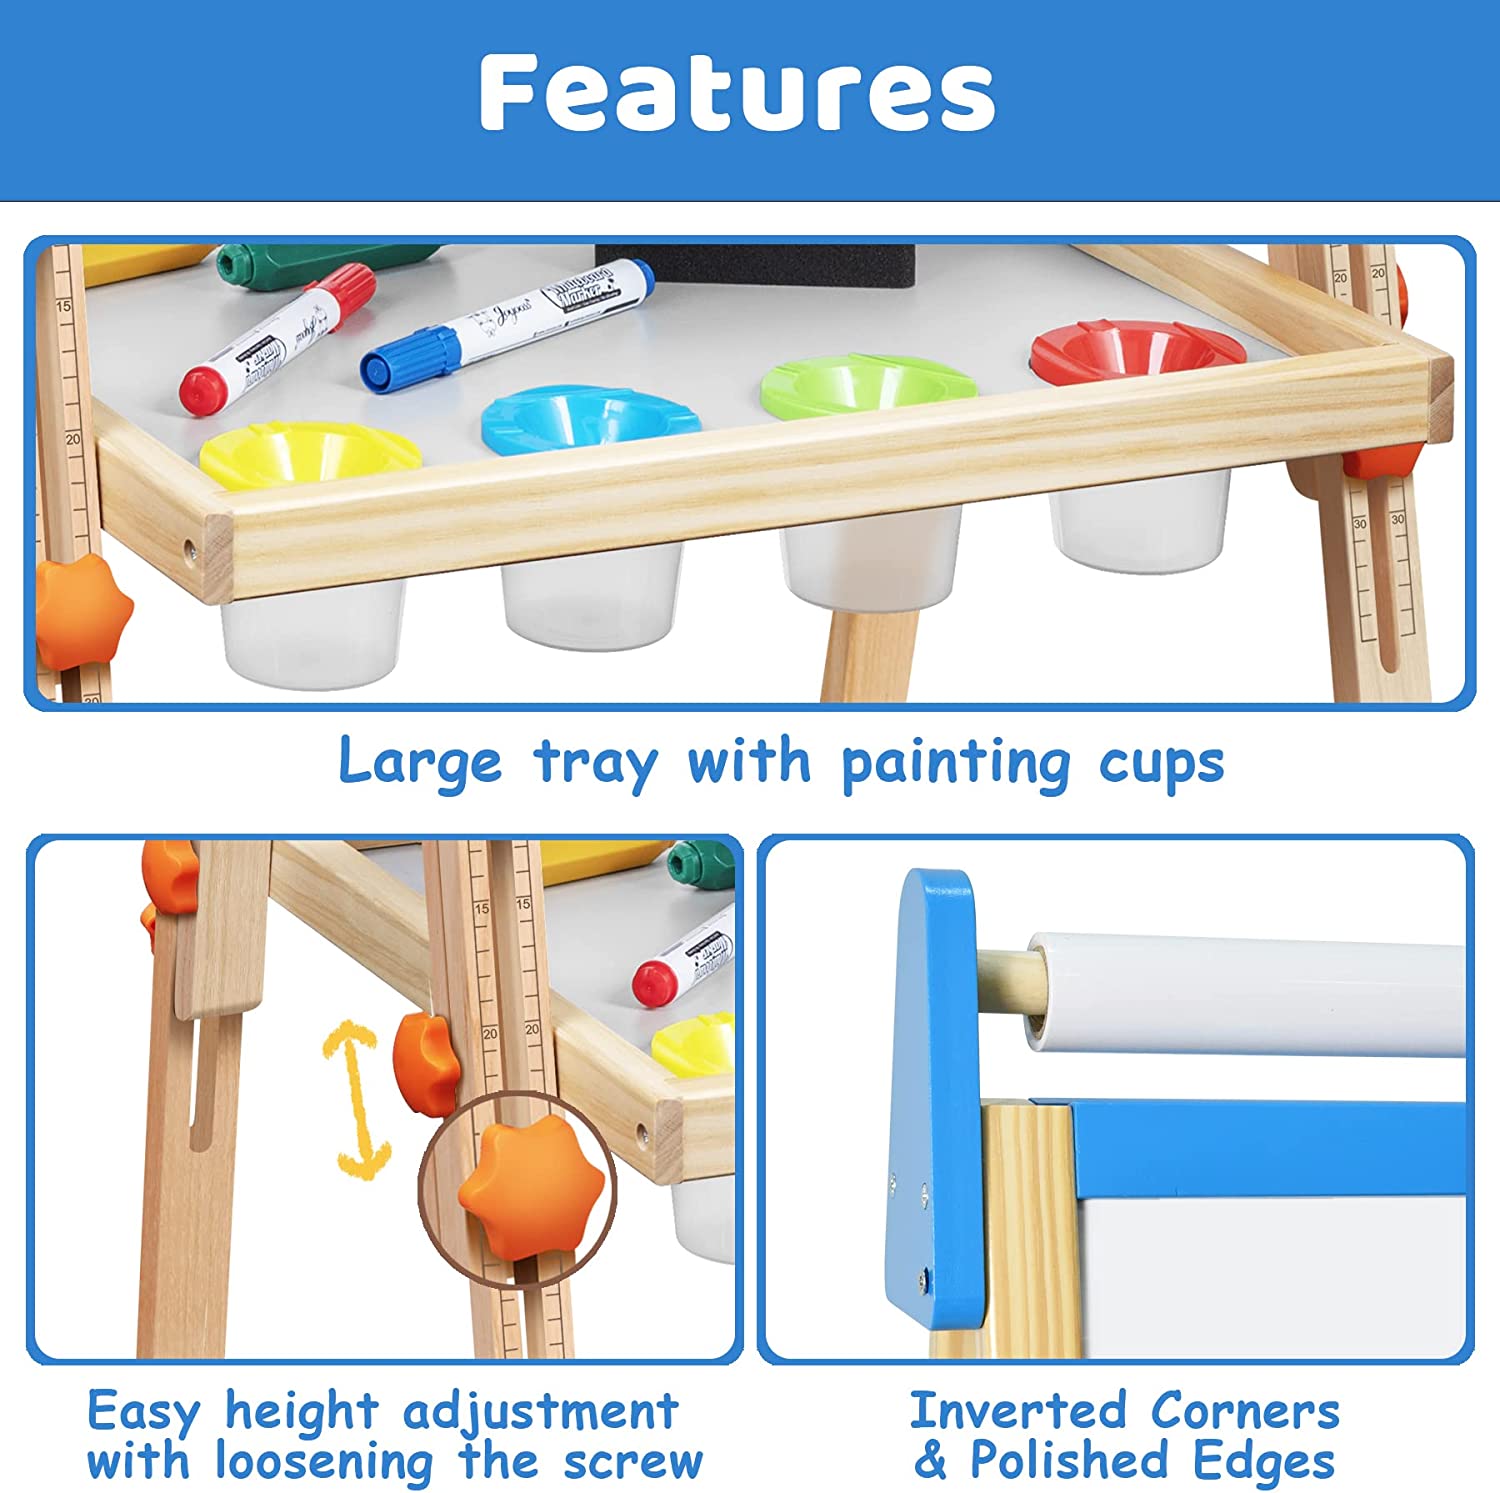  Easel for Kids - The Ultimate Art Station for Endless Fun, Kids  Easel with Paper Roll - Unleash Child's Creativity, Kids Easel with  Magnetic Chalkboard & White Board - Bring Out